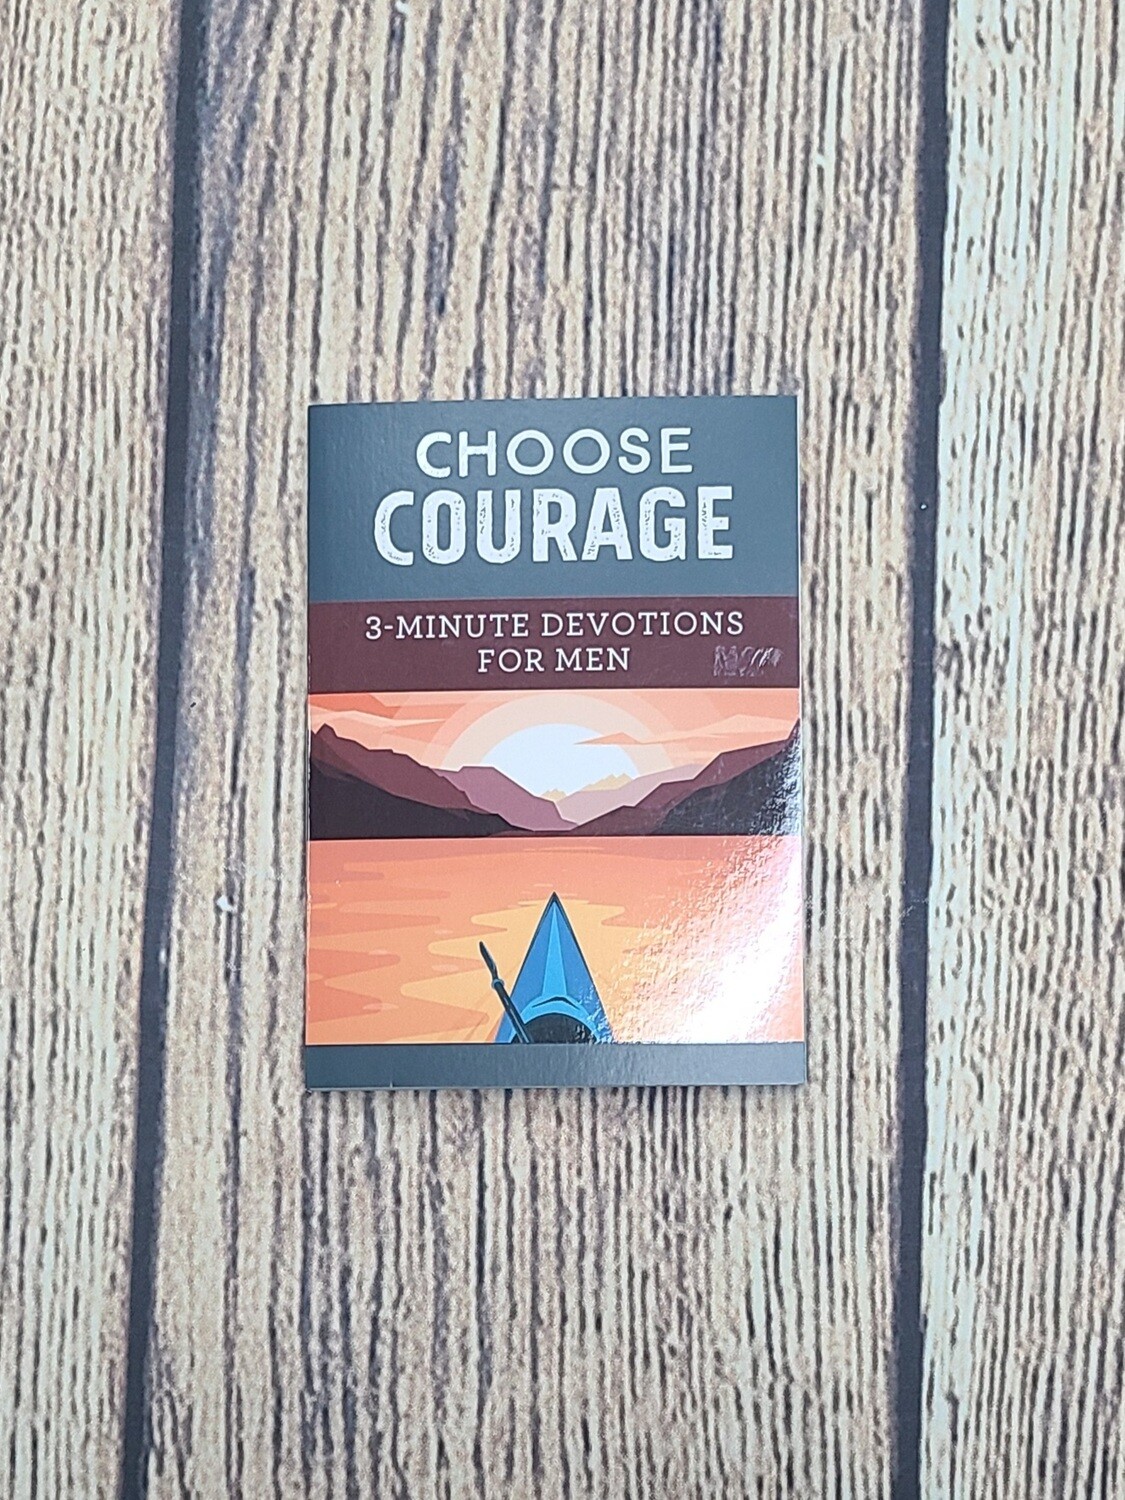 Choose Courage: 3-Minute Devotions for Men by David Sanford